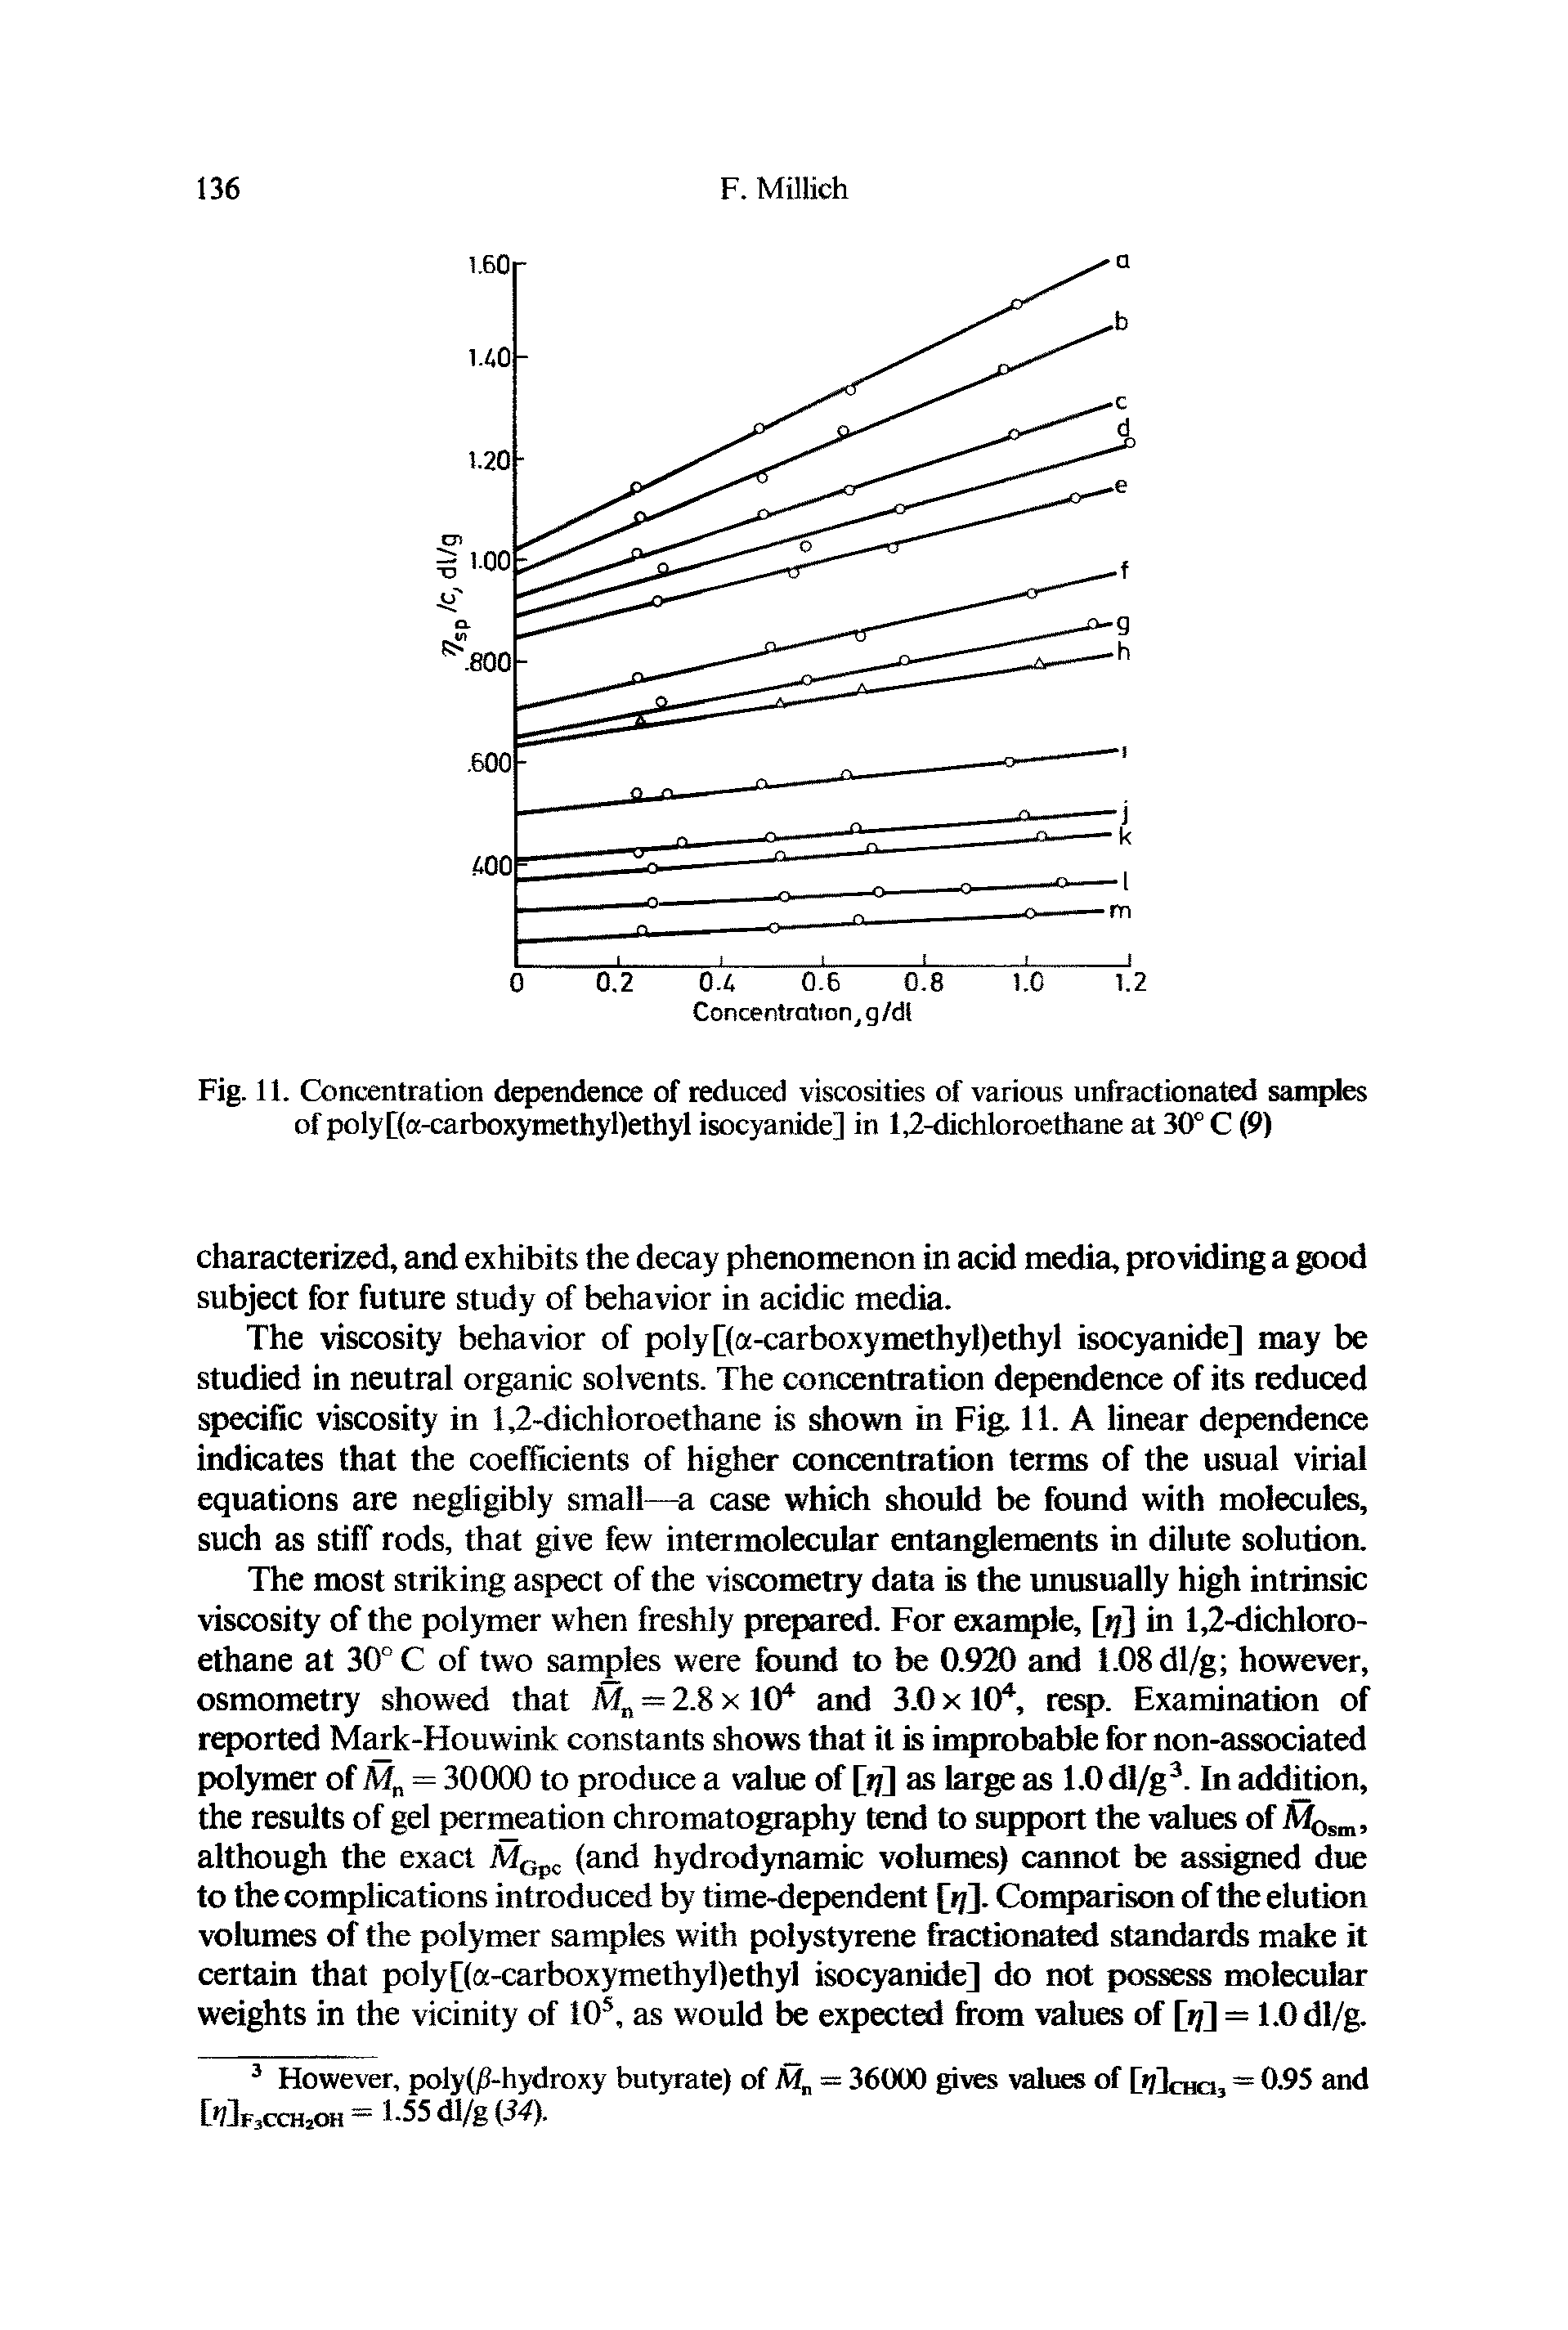 Fig. 11. Concentration dependence of reduced viscosities of various unfractionated samples of poly[(a-carboxymethyl)ethyl isocyanide] in 1,2-dichloroethane at 30° C (9)...